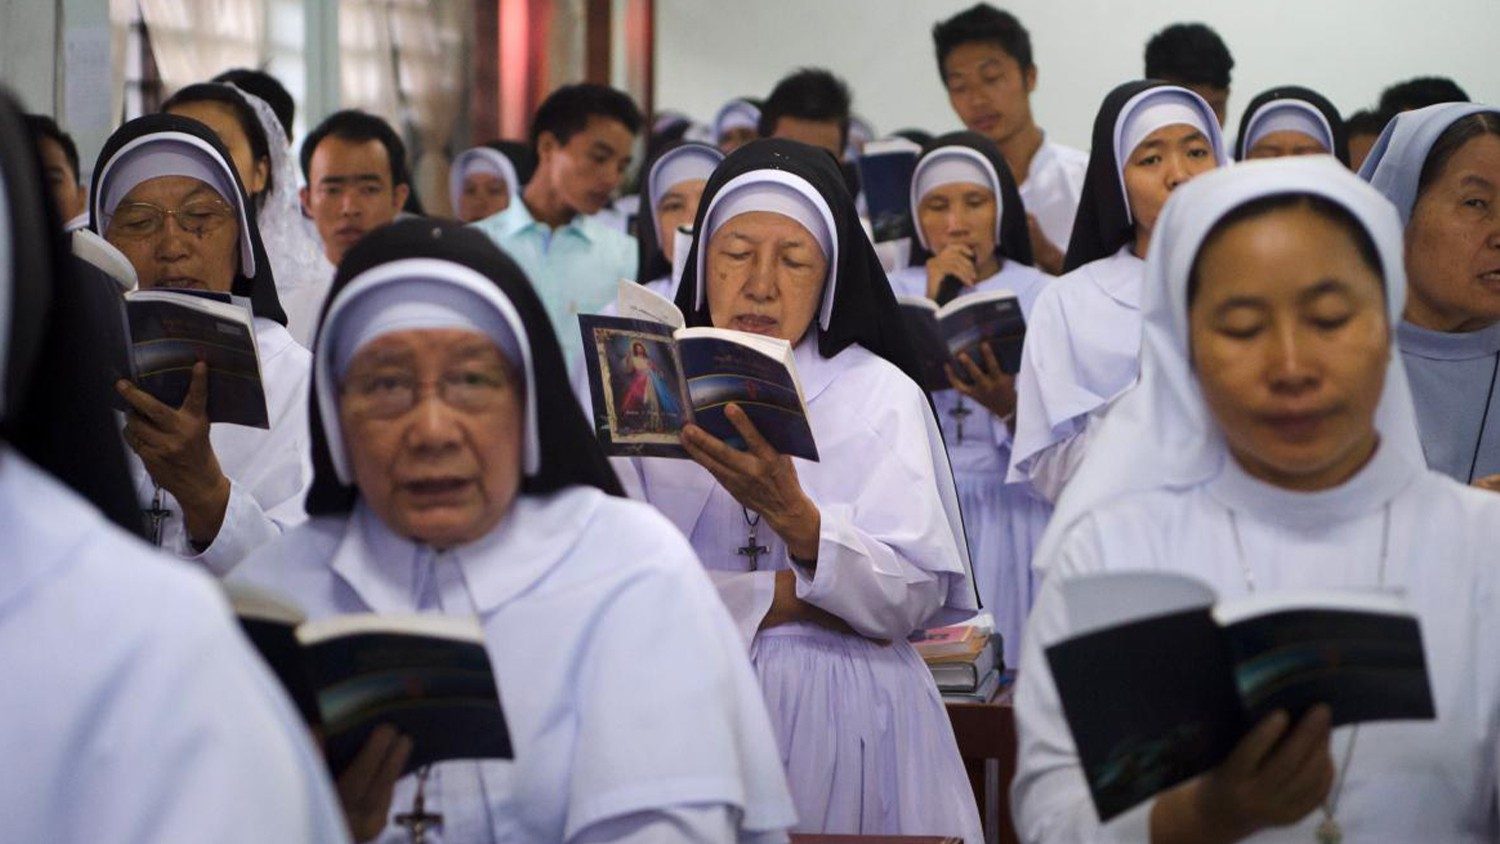 A religious sister in Myanmar: ‘Remaining with my people’